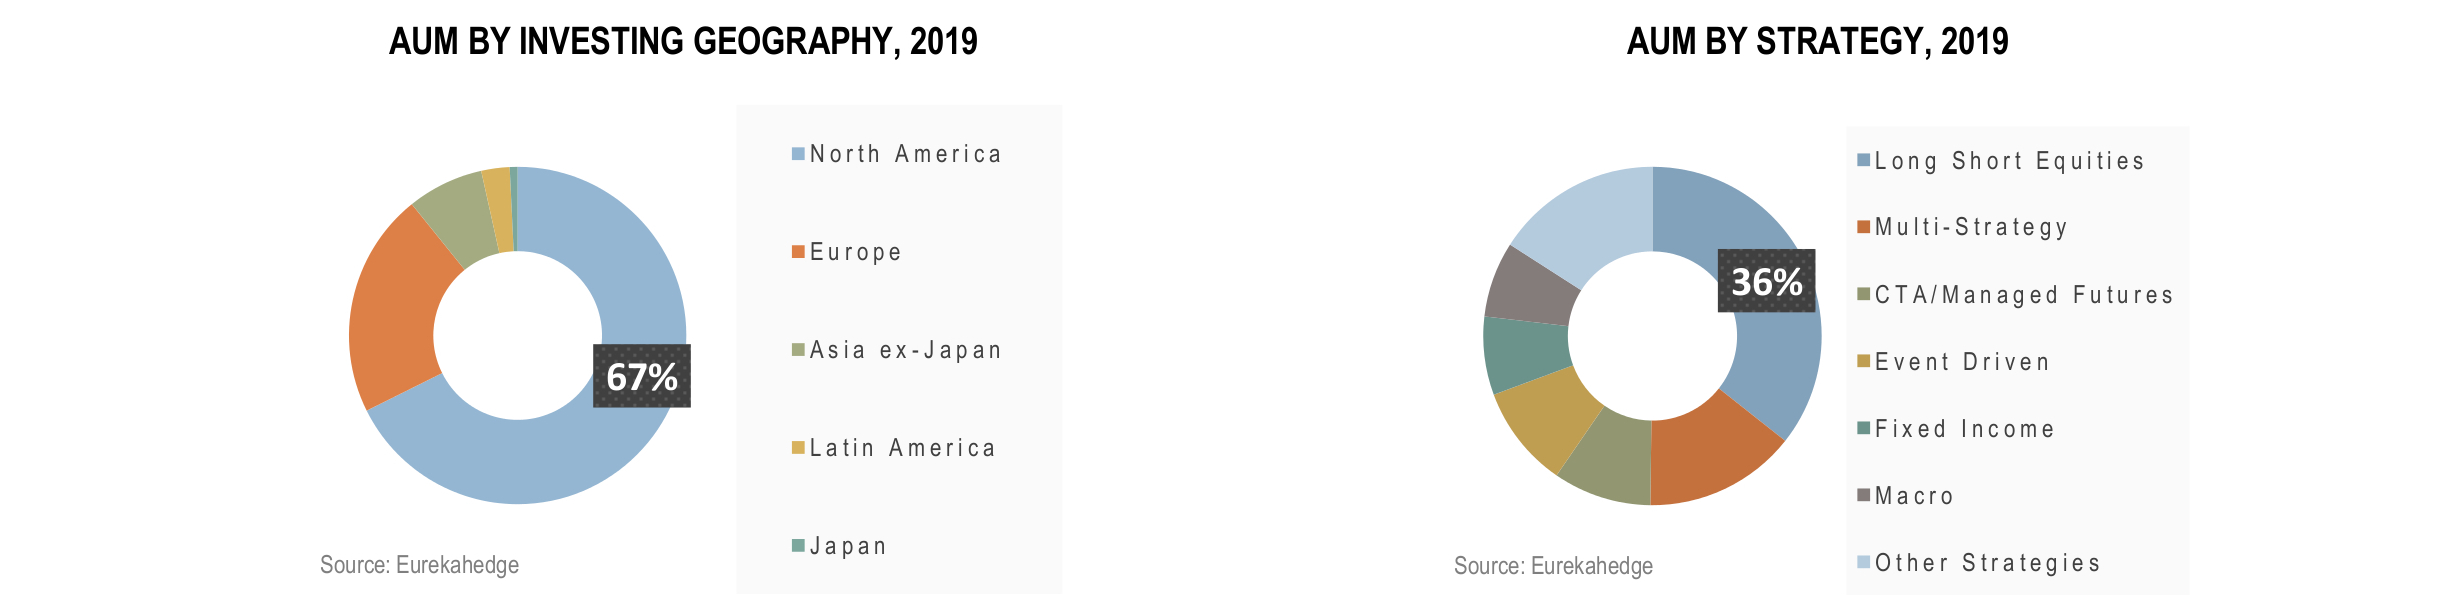 Global Hedge Funds Infographic April 2019 - AUM by investing geography and strategy